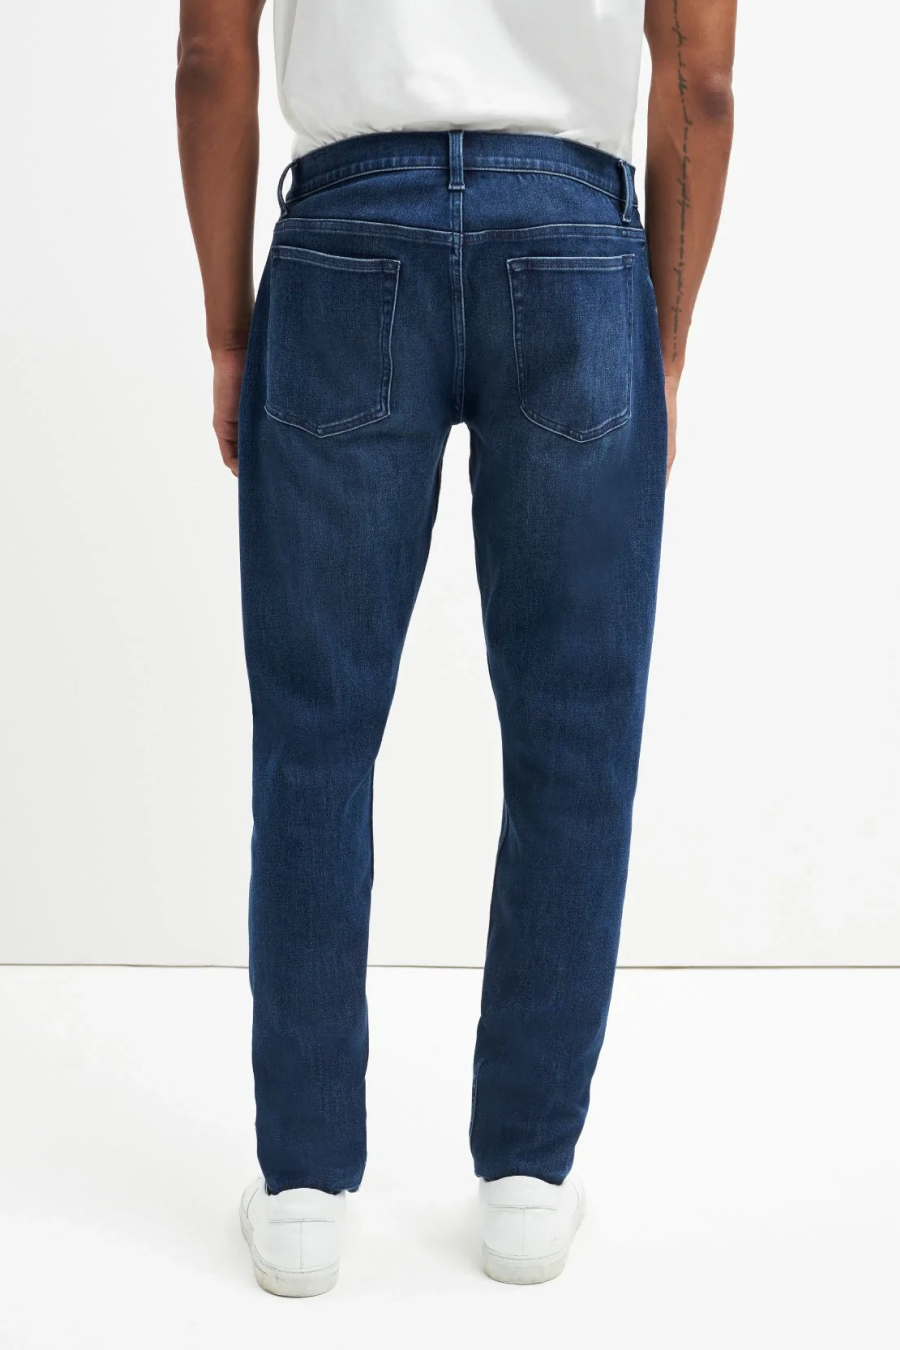 7 For All Mankind Men's Darted Adrien Jean